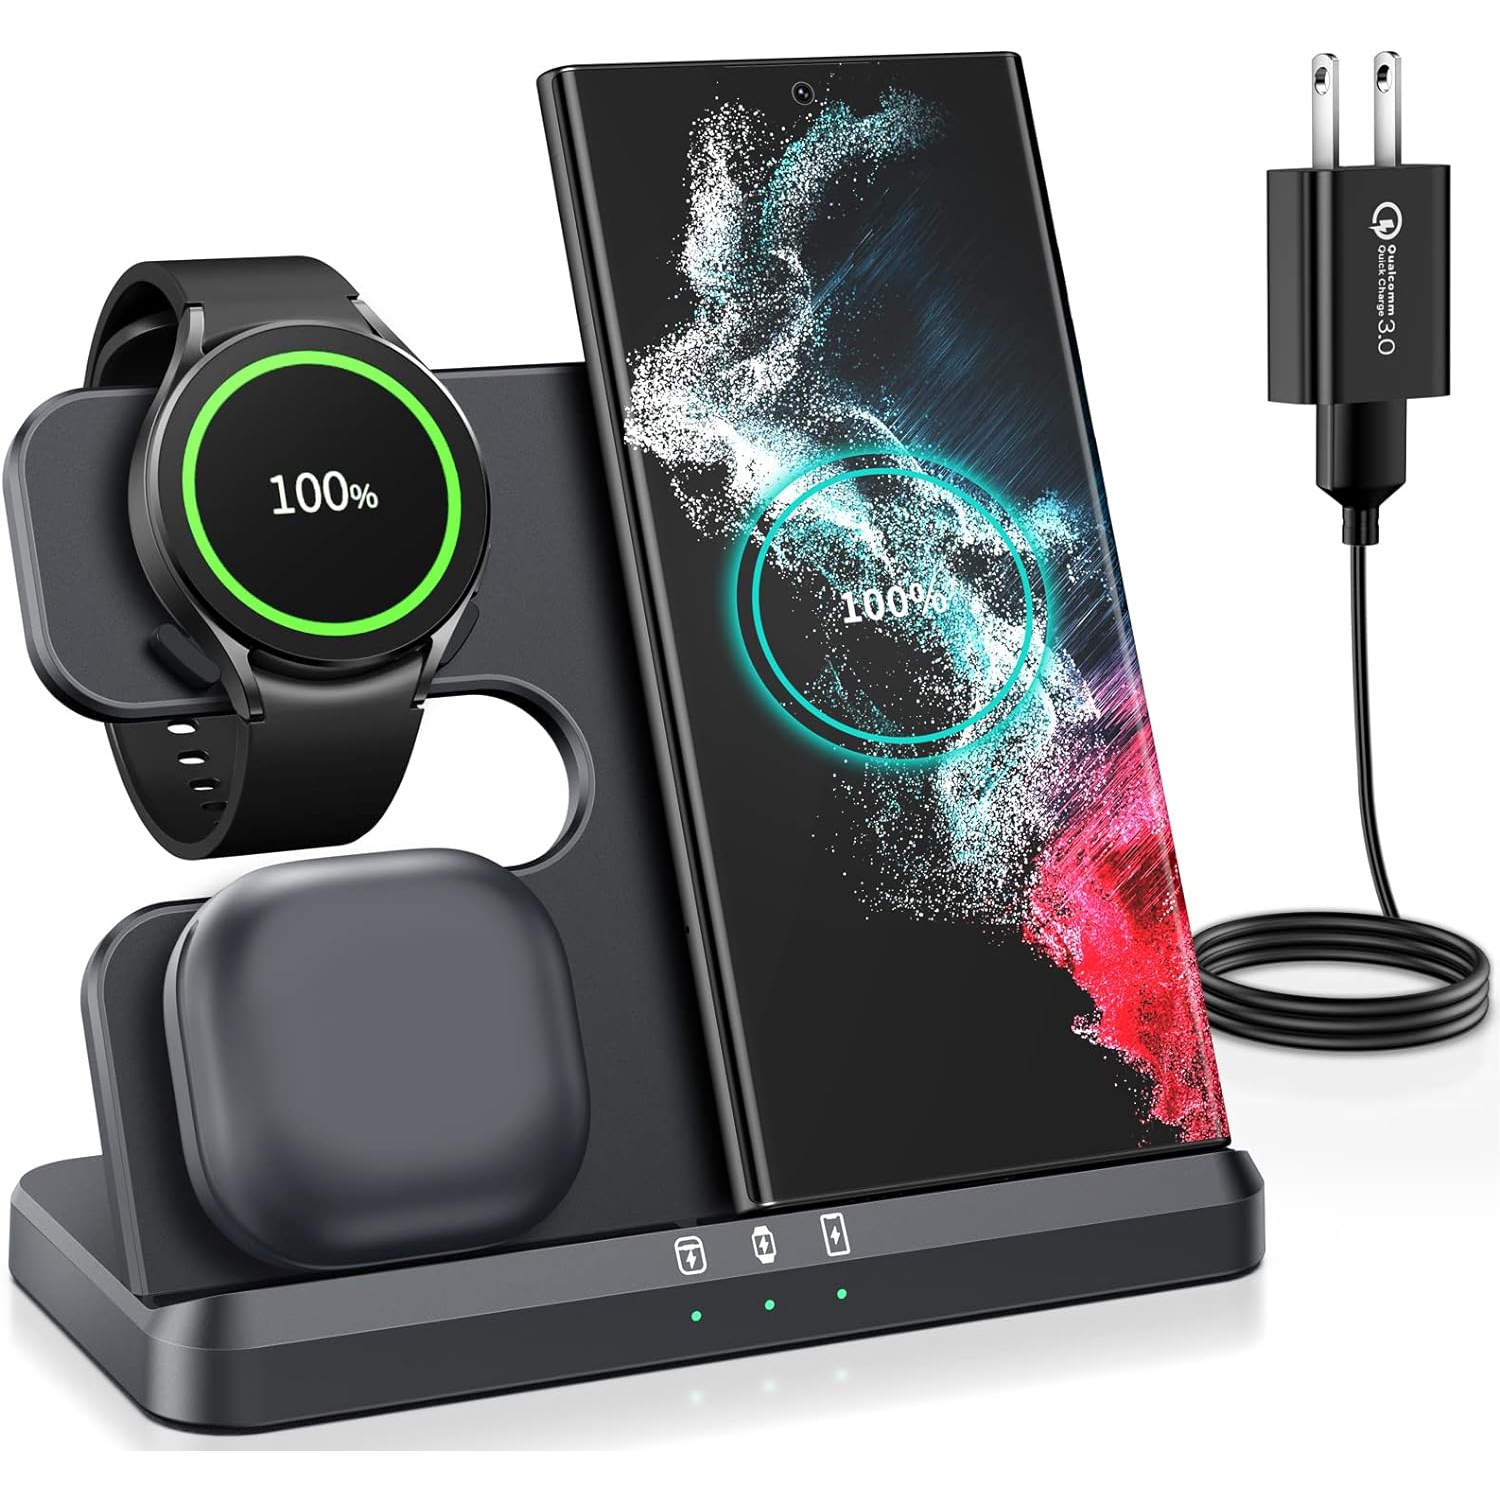 Samsung Wireless Charging Station, 3 in 1 Wireless Charging Stand for Galaxy Watch 5 Pro/5/4/3/Active 2/1,